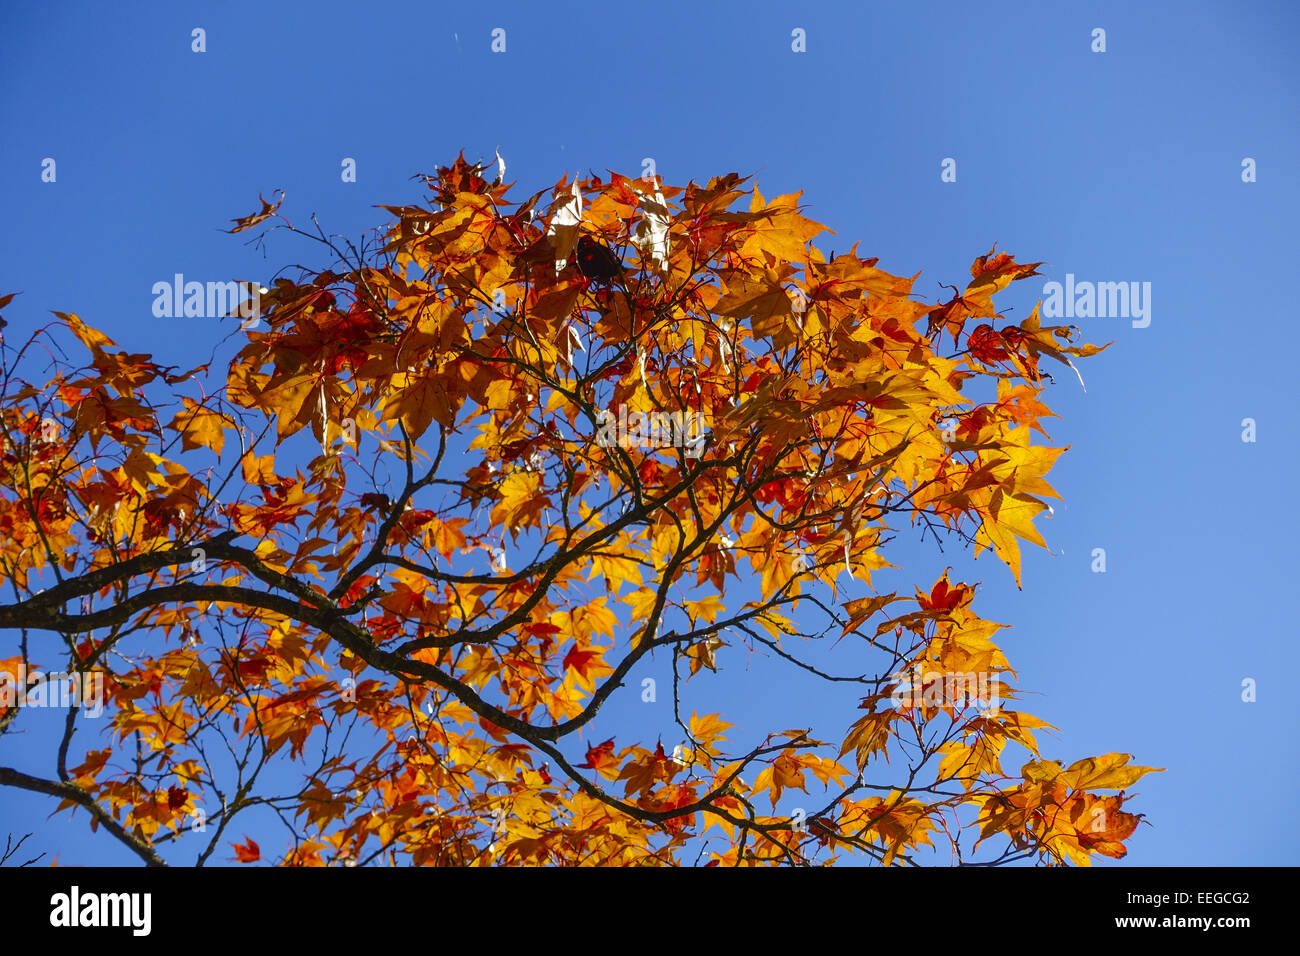 Farbige Blätter eines Ahornbaumes im Herbst vor blauem Himmel, Colored leaves of a maple tree in autumn against blue sky, Acer p Stock Photo